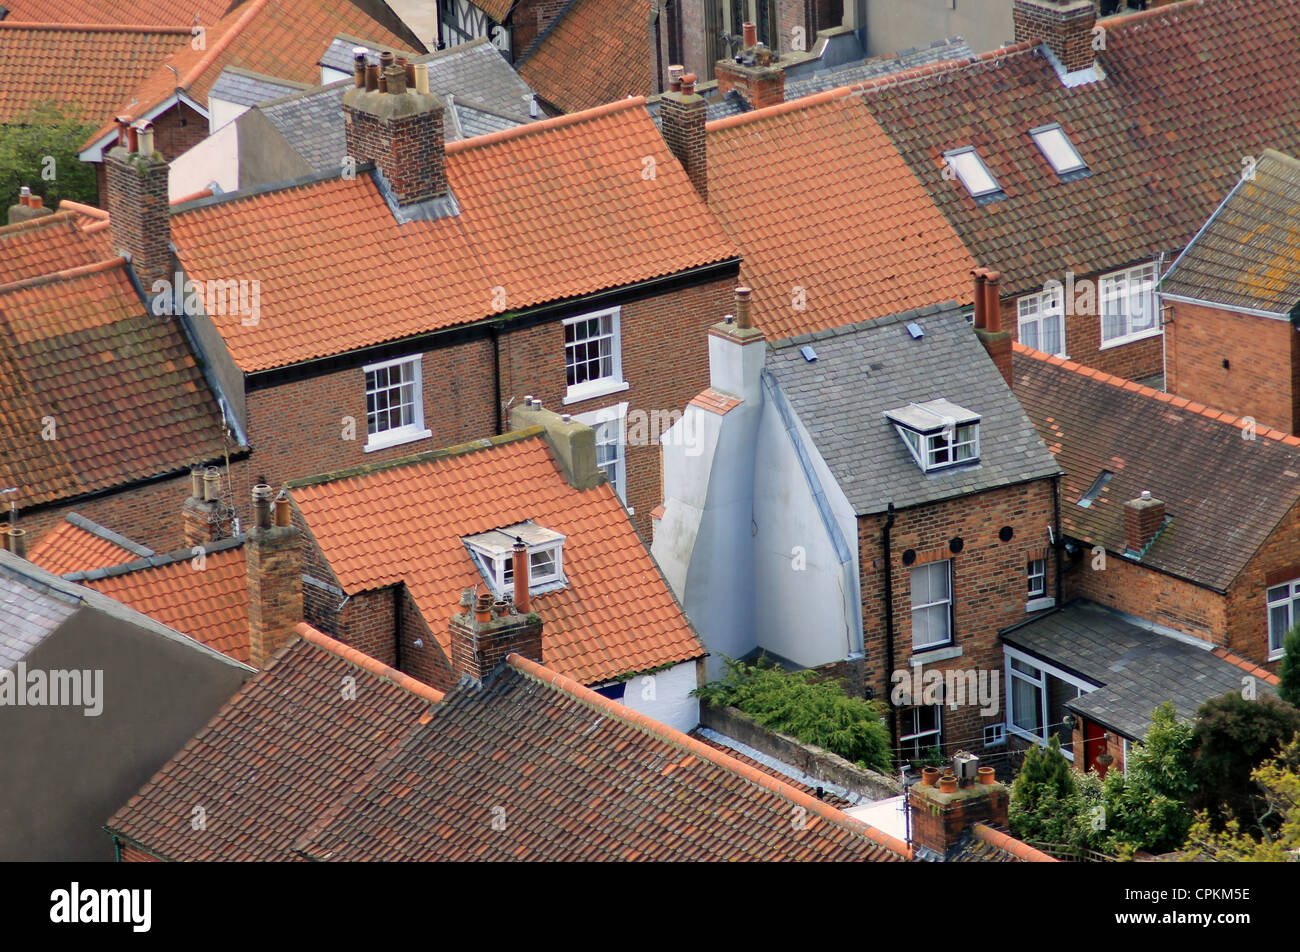 Aerial view of urban housing showing rooftops. Stock Photo